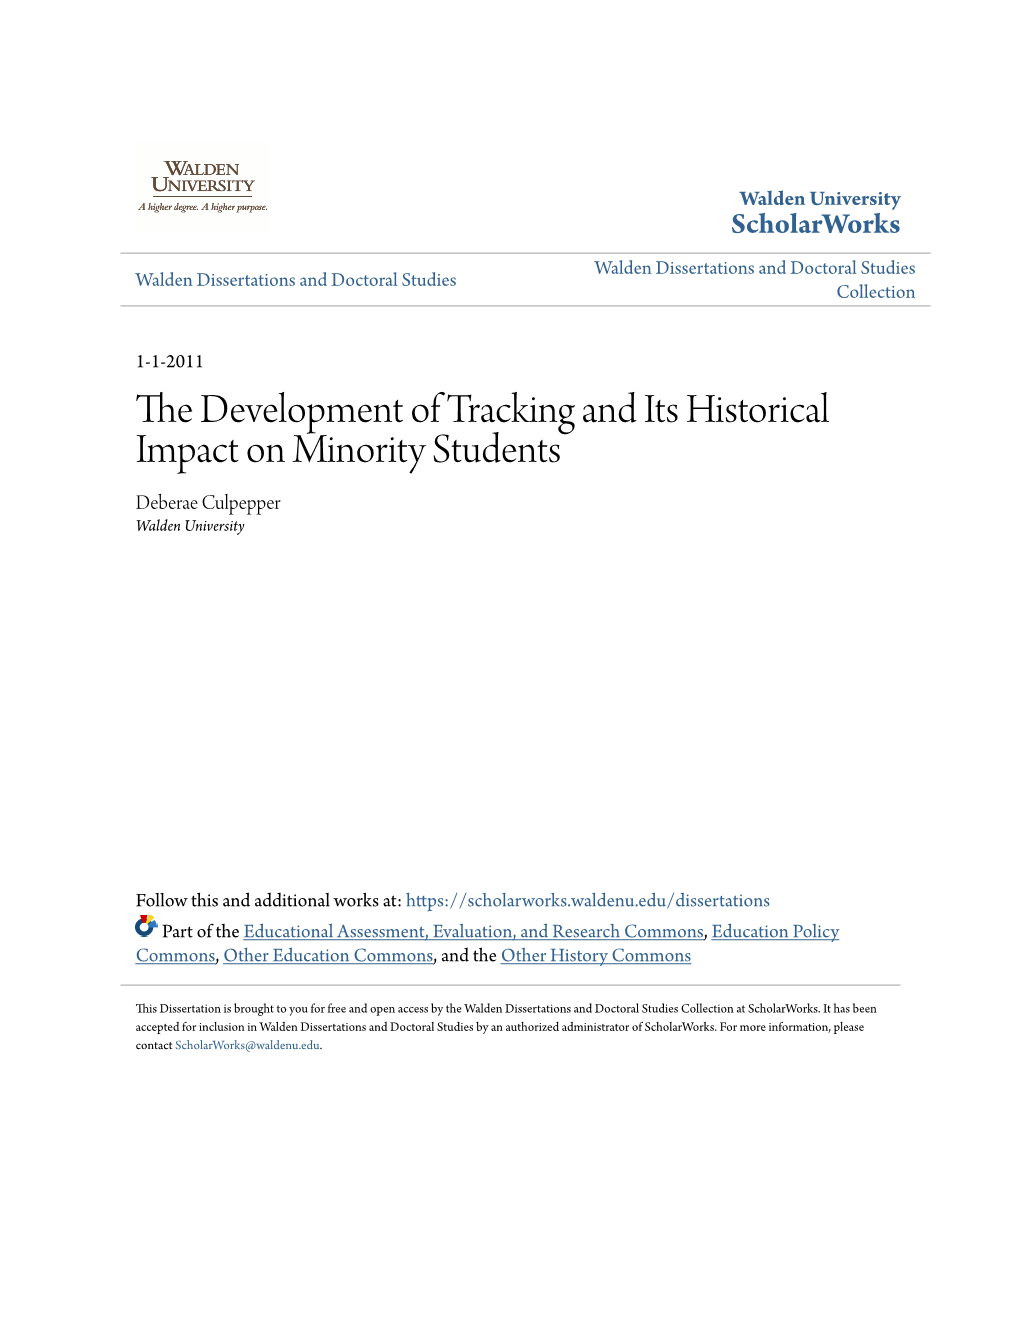 The Development of Tracking and Its Historical Impact on Minority Students